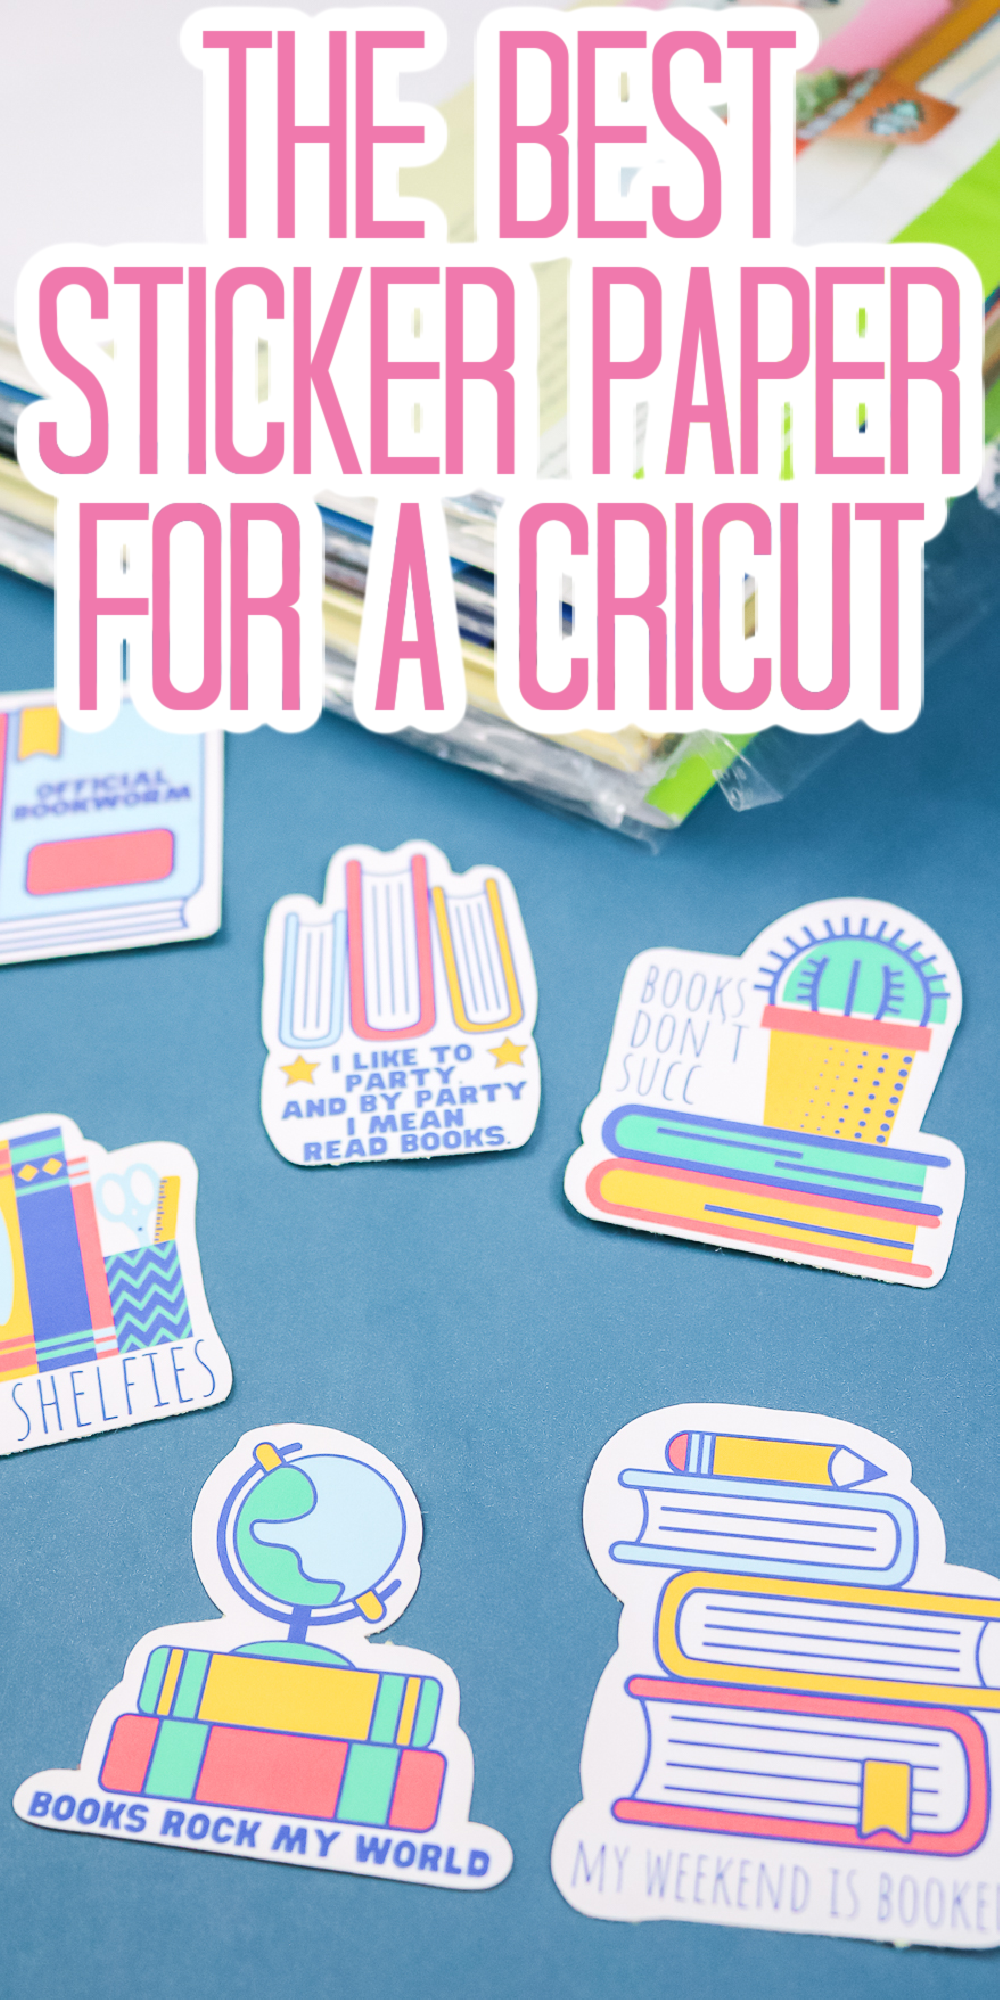 WHICH IS THE BEST STICKER PAPER TO USE WITH MY CRICUT? Comparing